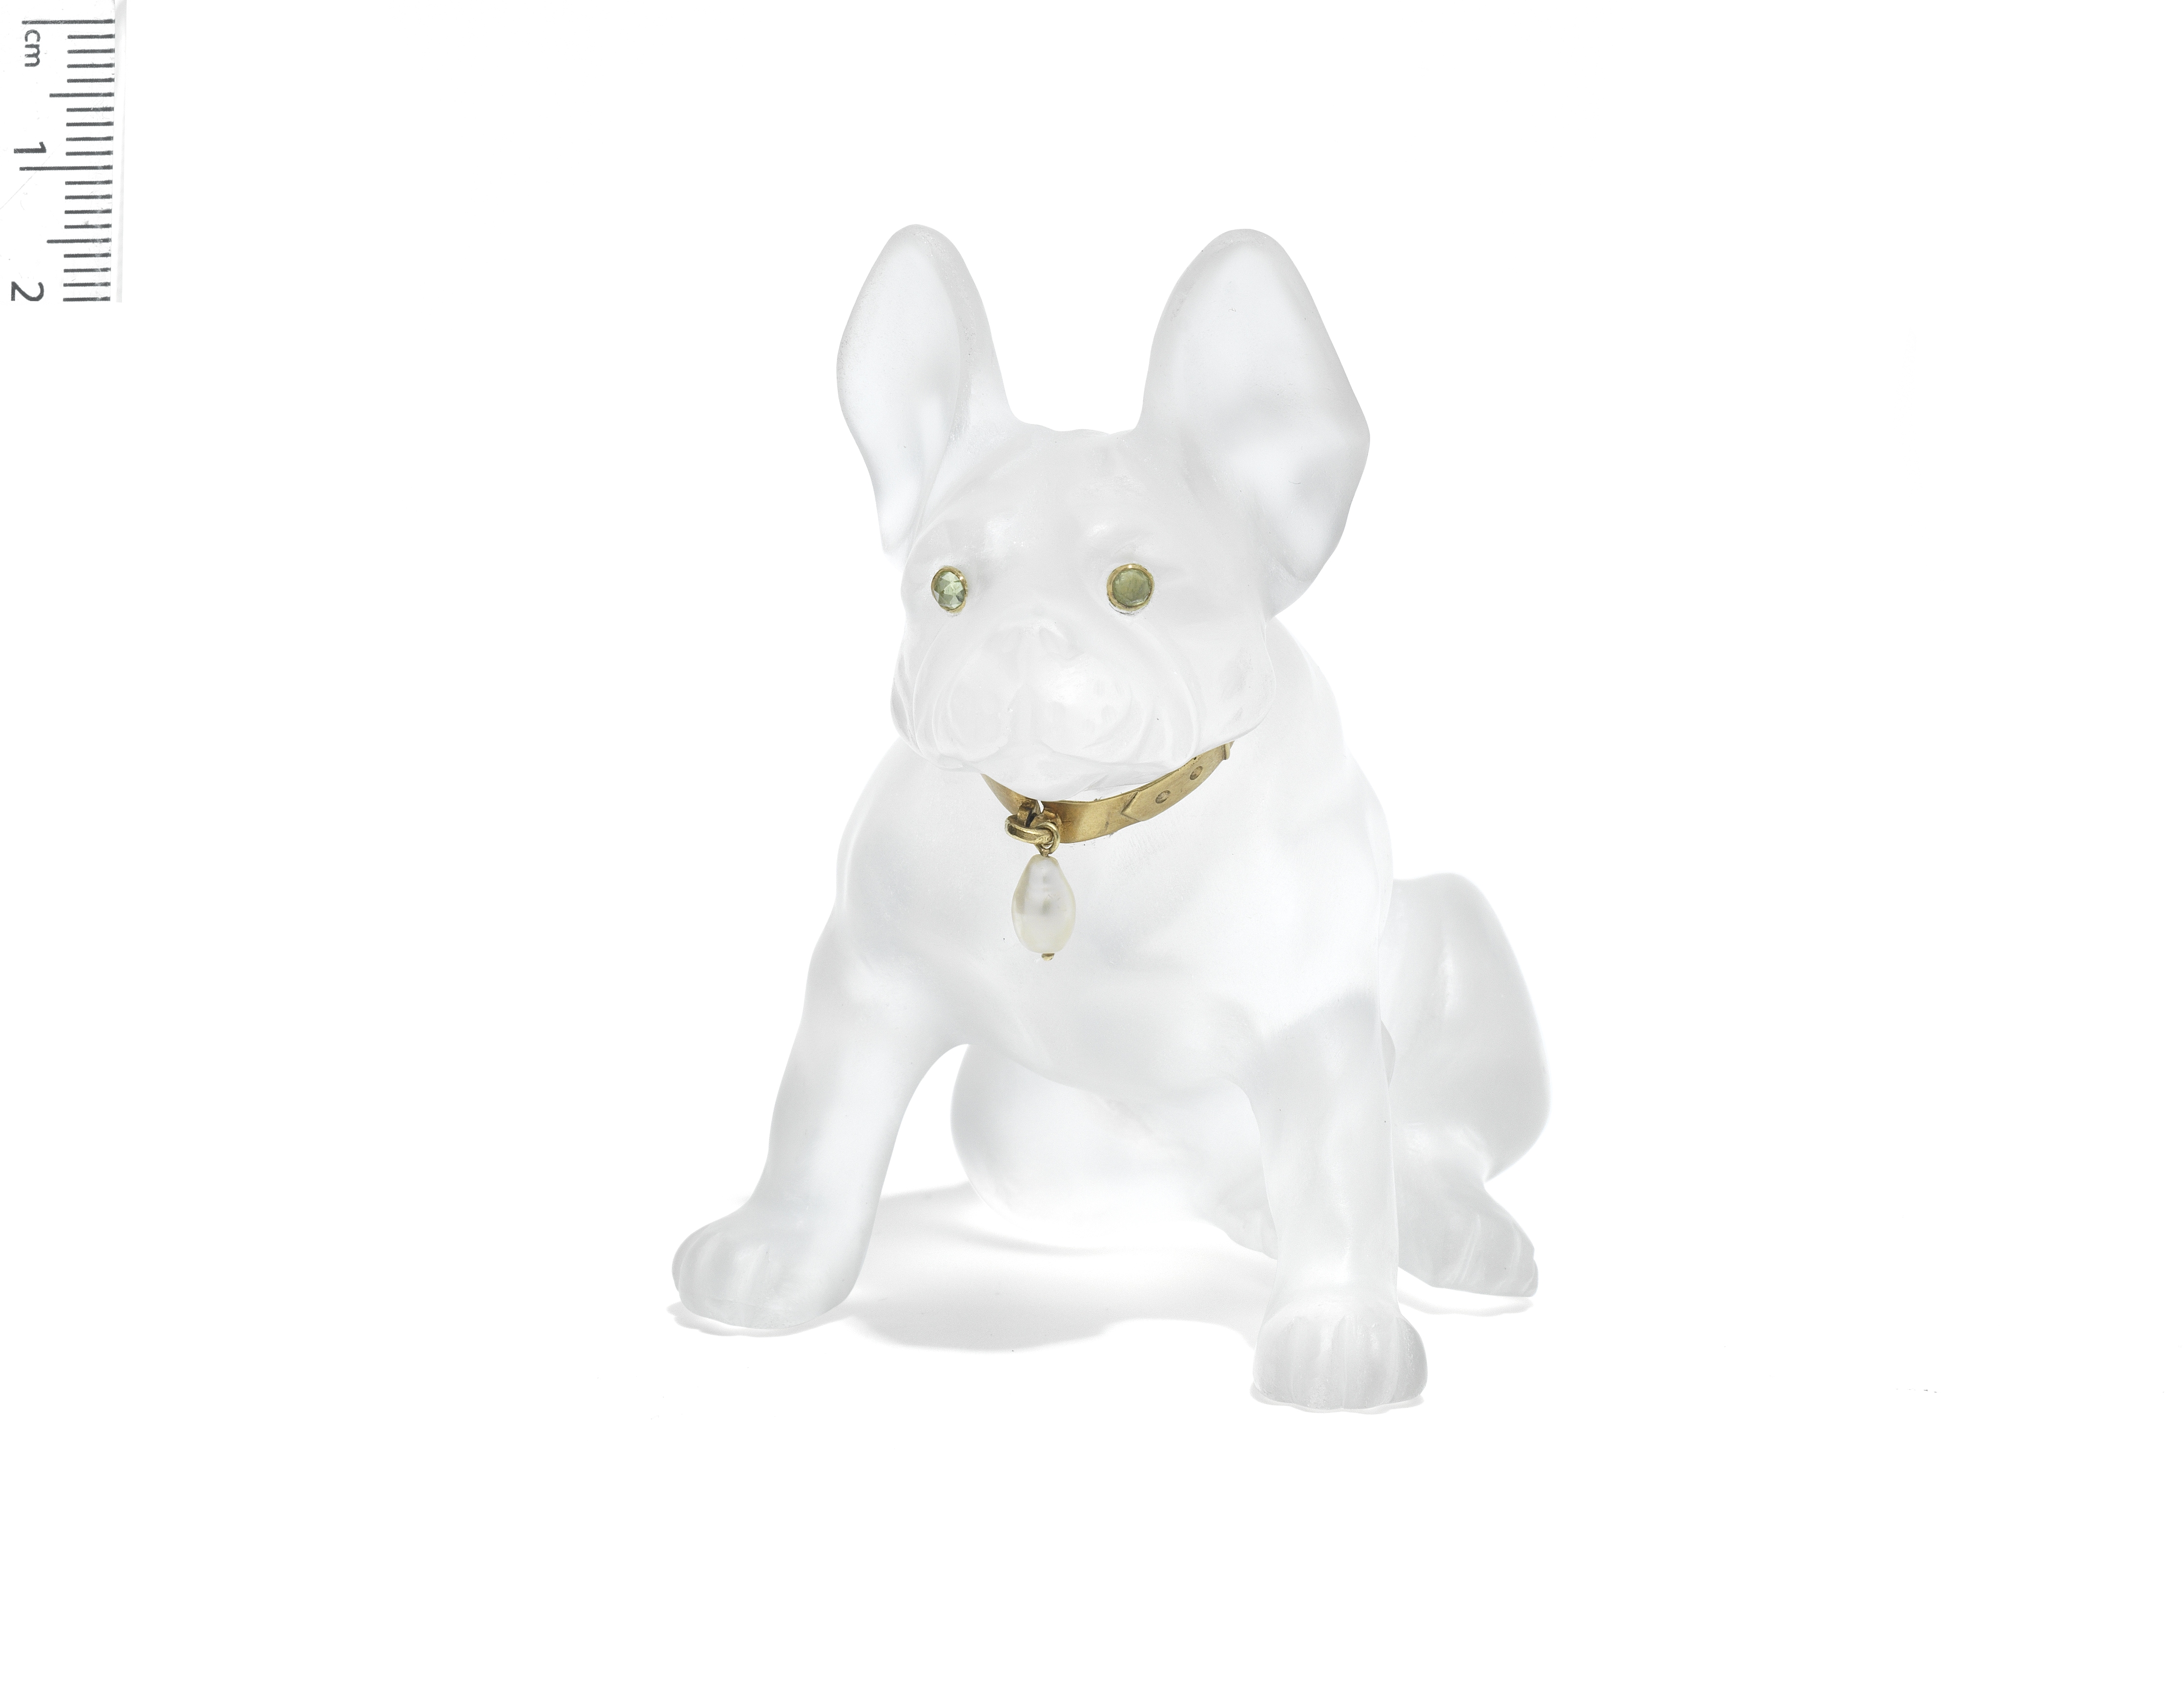 AN EARLY 20TH CENTURY ROCK CRYSTAL FRENCH BULLDOG, ATTRIBUTED TO CARTIER